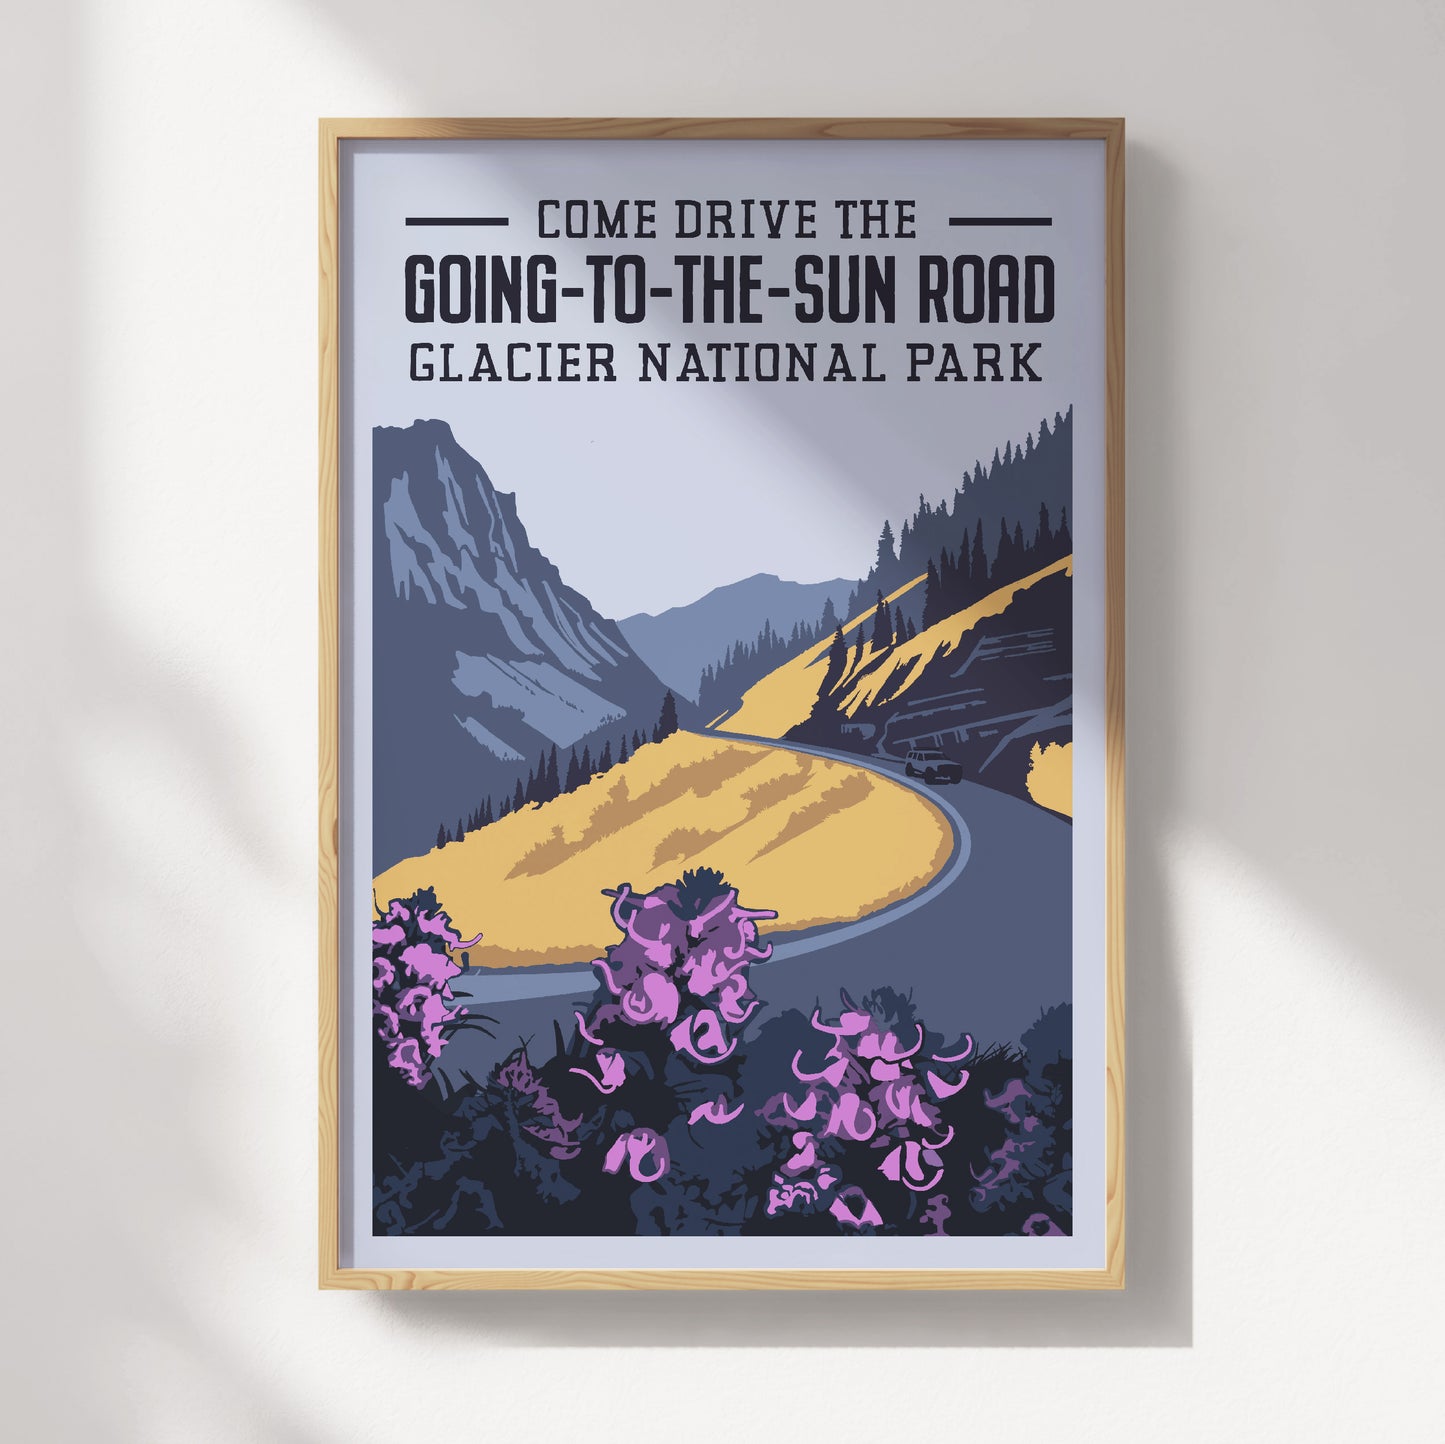 Going-to-the-Sun-Road Travel Poster